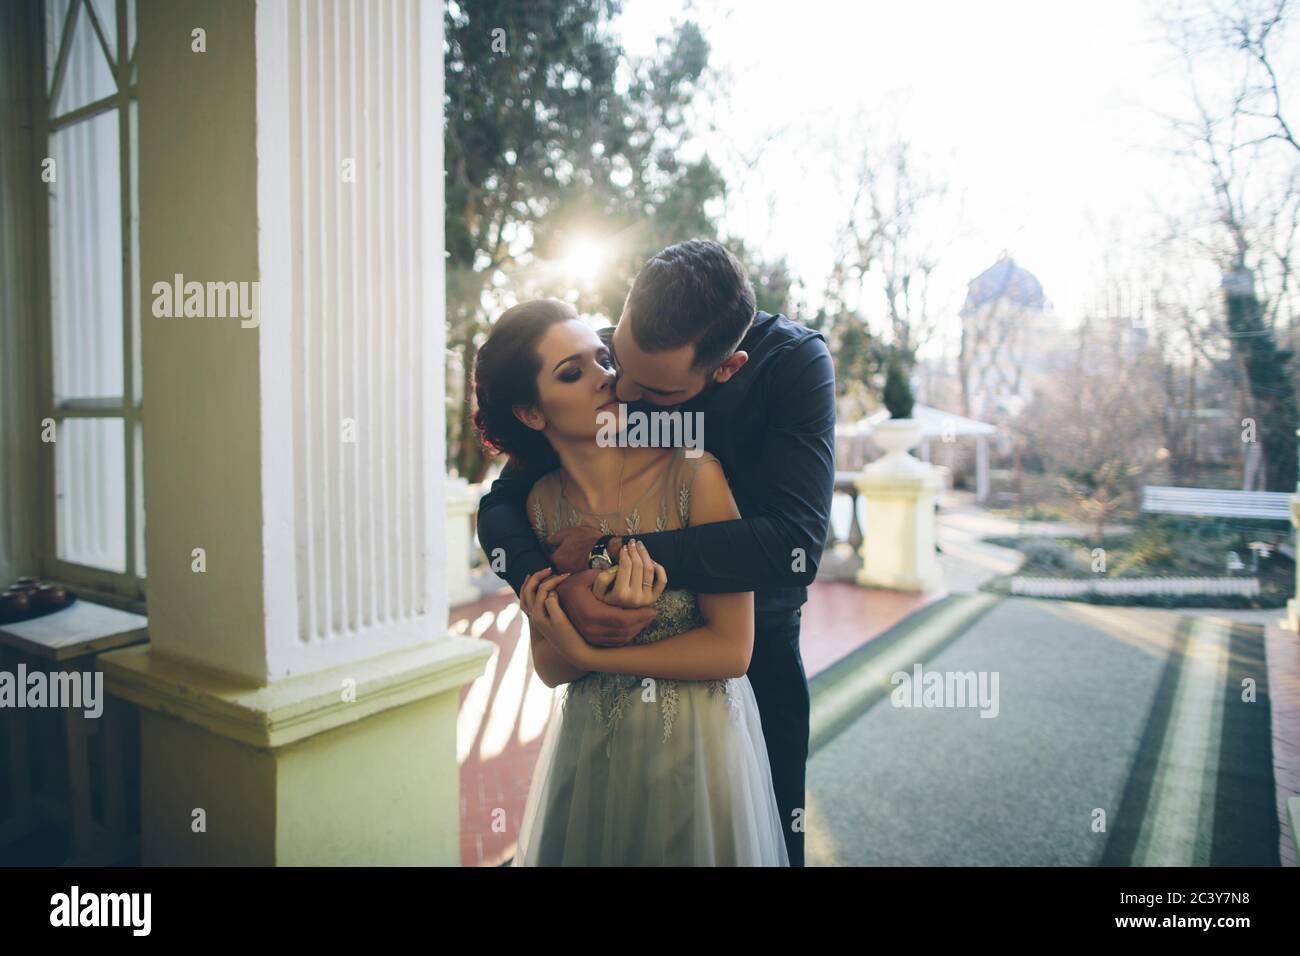 Newlywed couple embracing at terrace Stock Photo